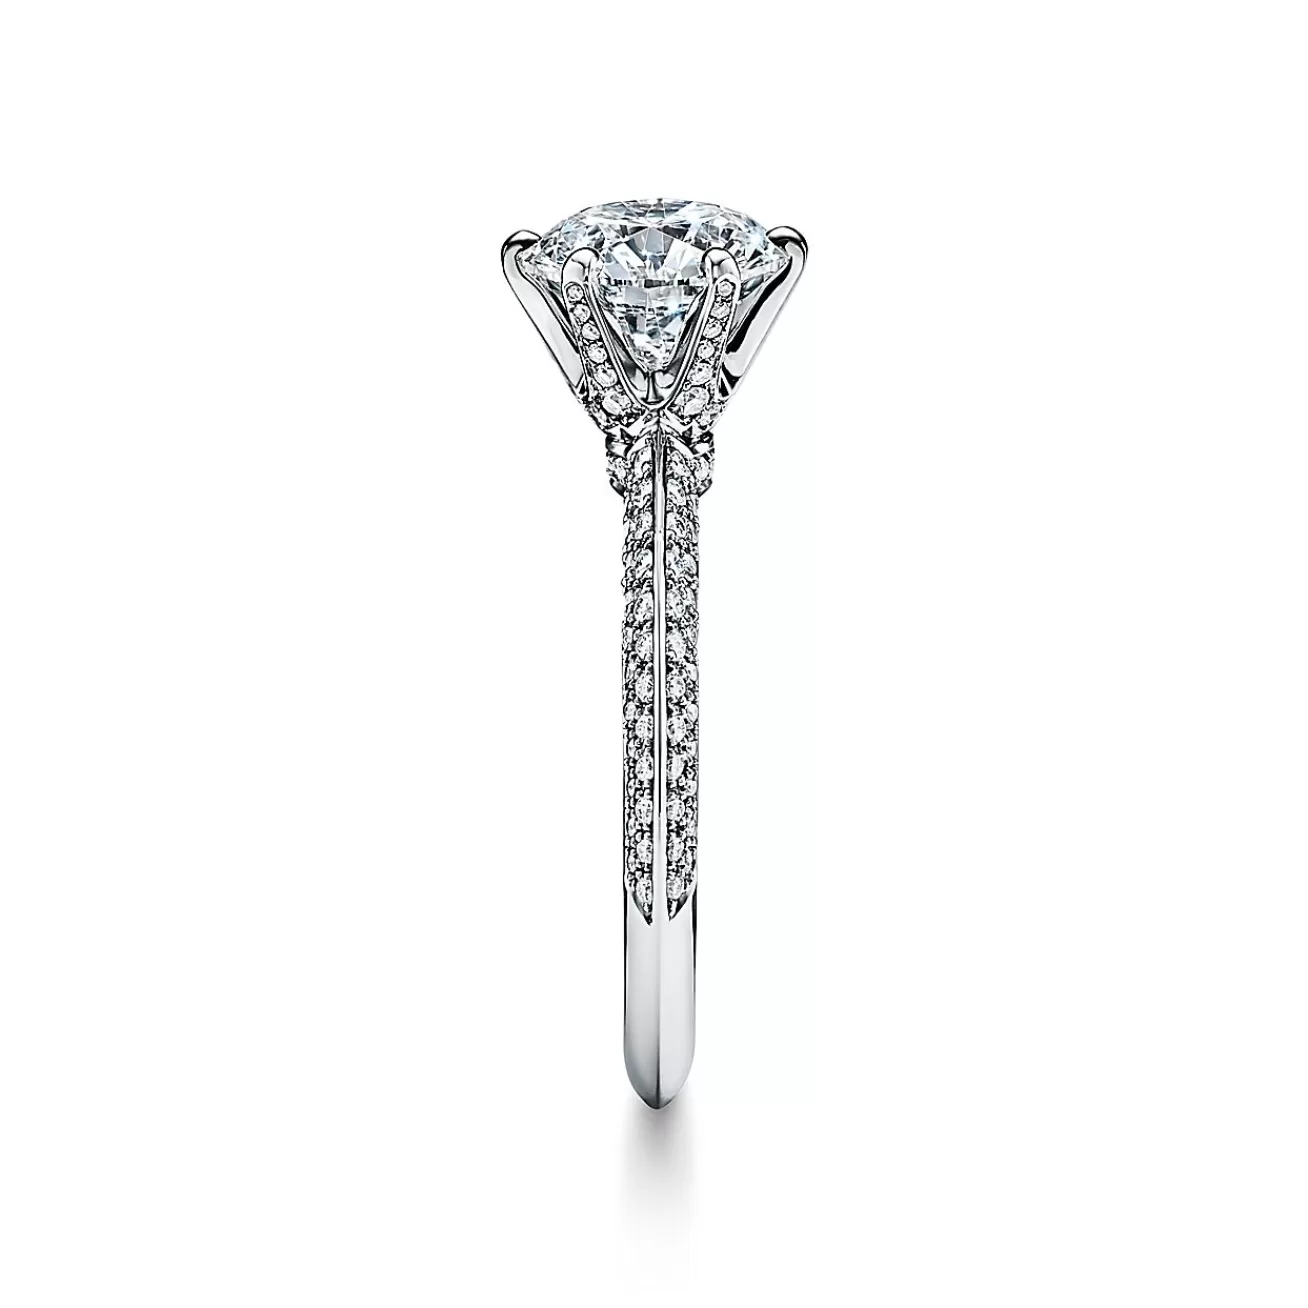 Tiffany & Co. Pavé Tiffany® Setting with a diamond band: world's most iconic engagement ring. | ^ Engagement Rings